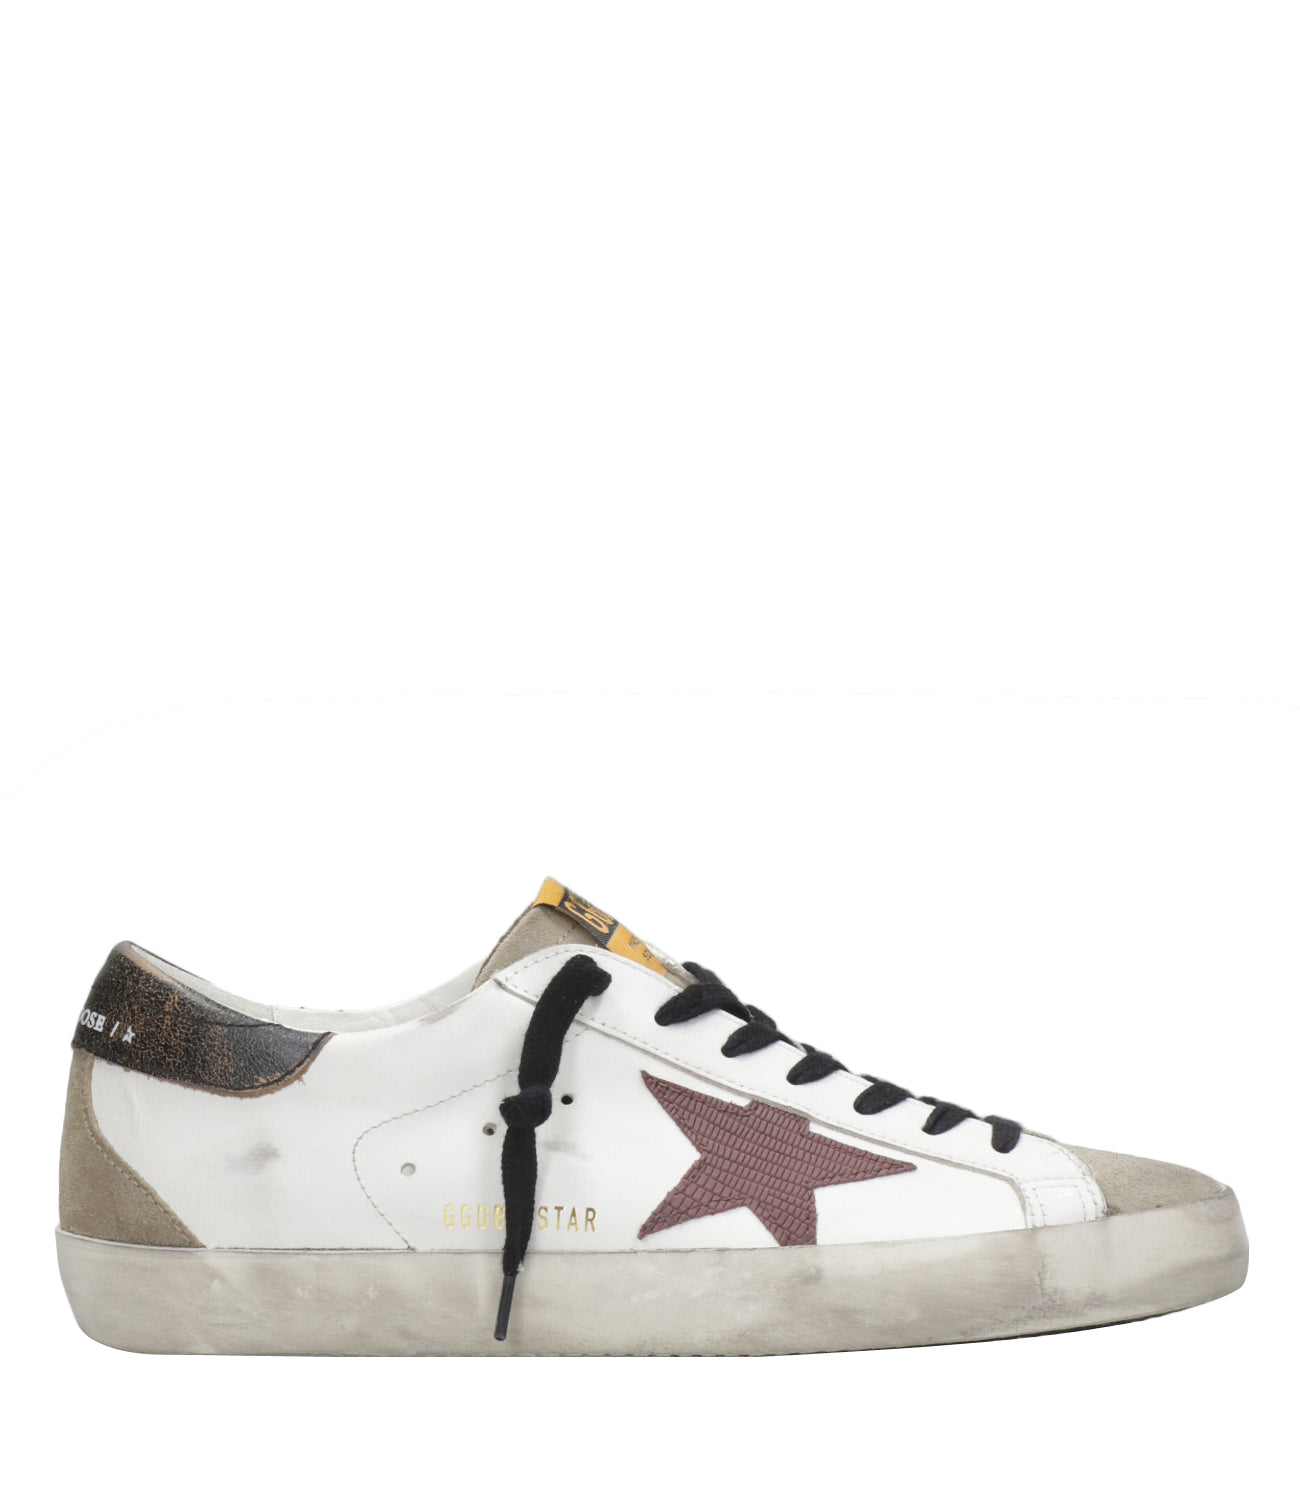 Golden Goose | Super-Star Sneakers White, Taupe and Bordeaux